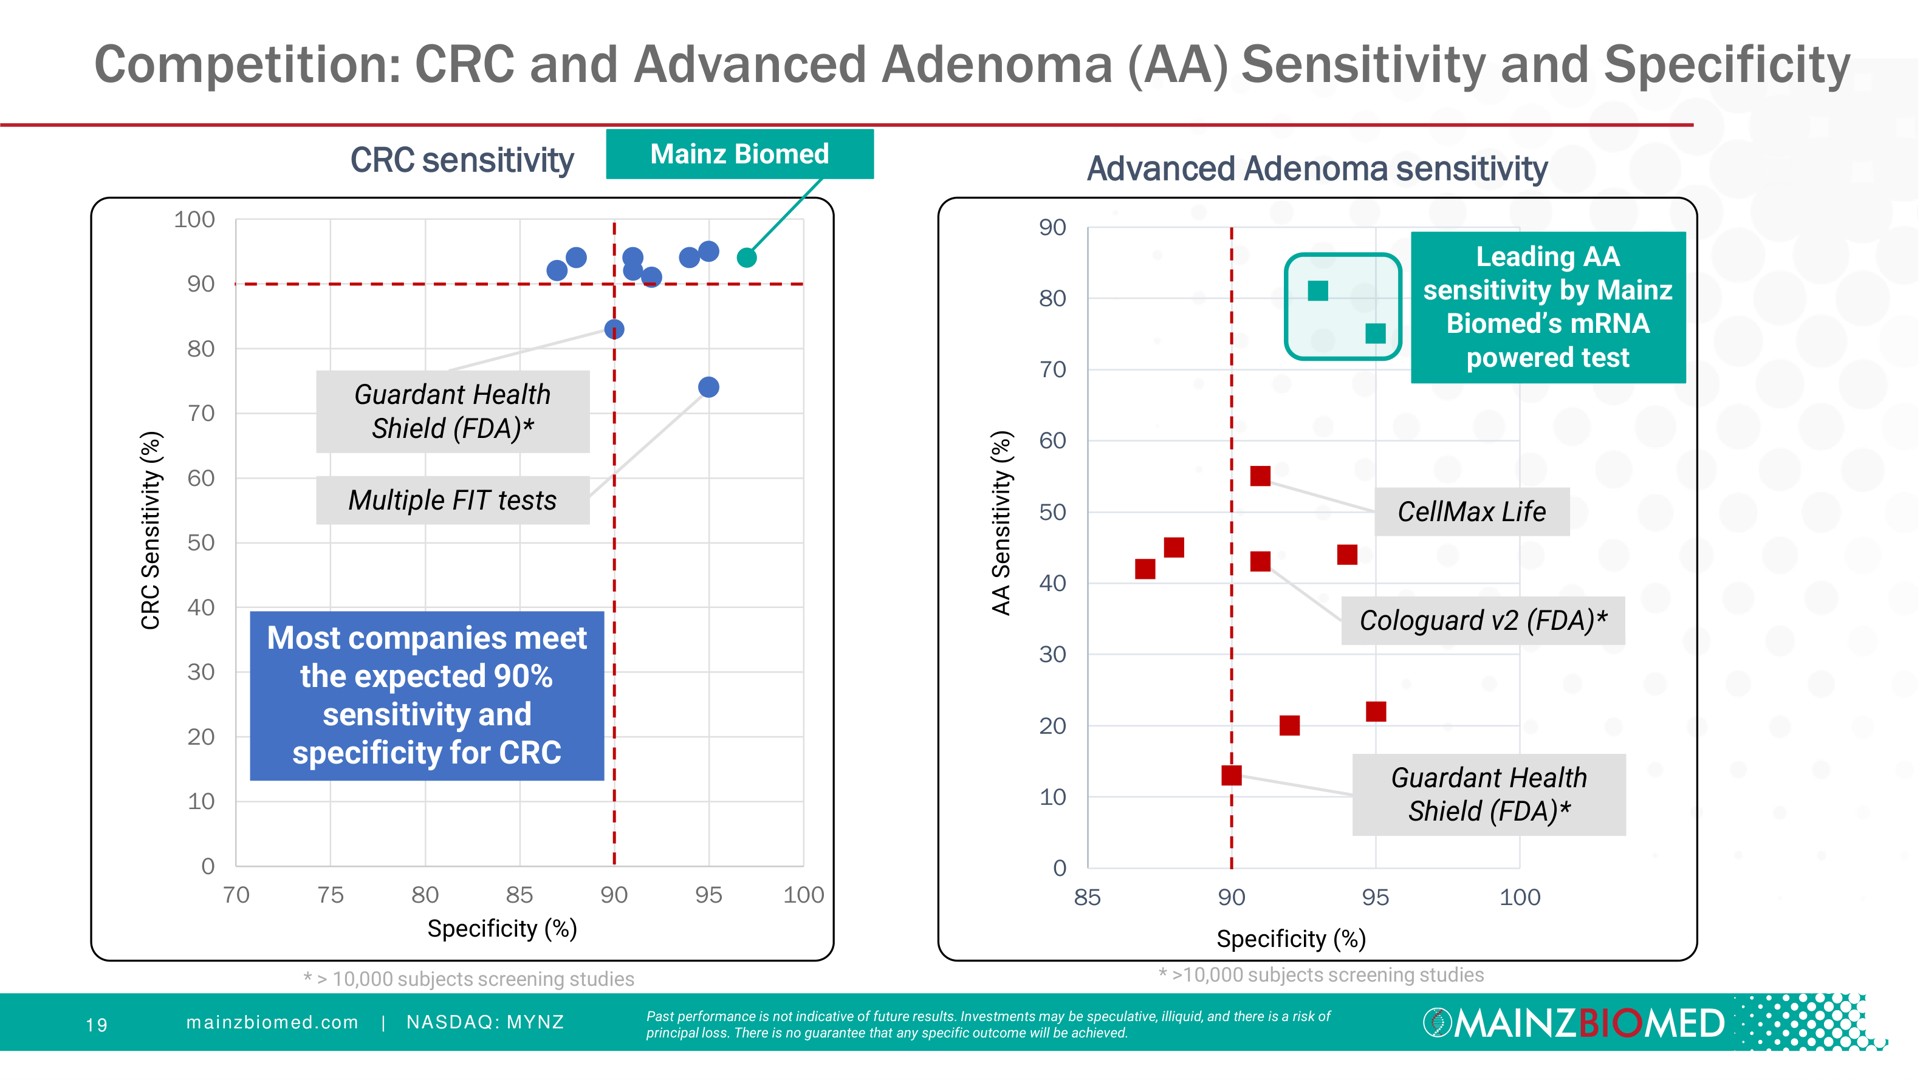 competition and advanced adenoma sensitivity and specificity | Mainz Biomed NV